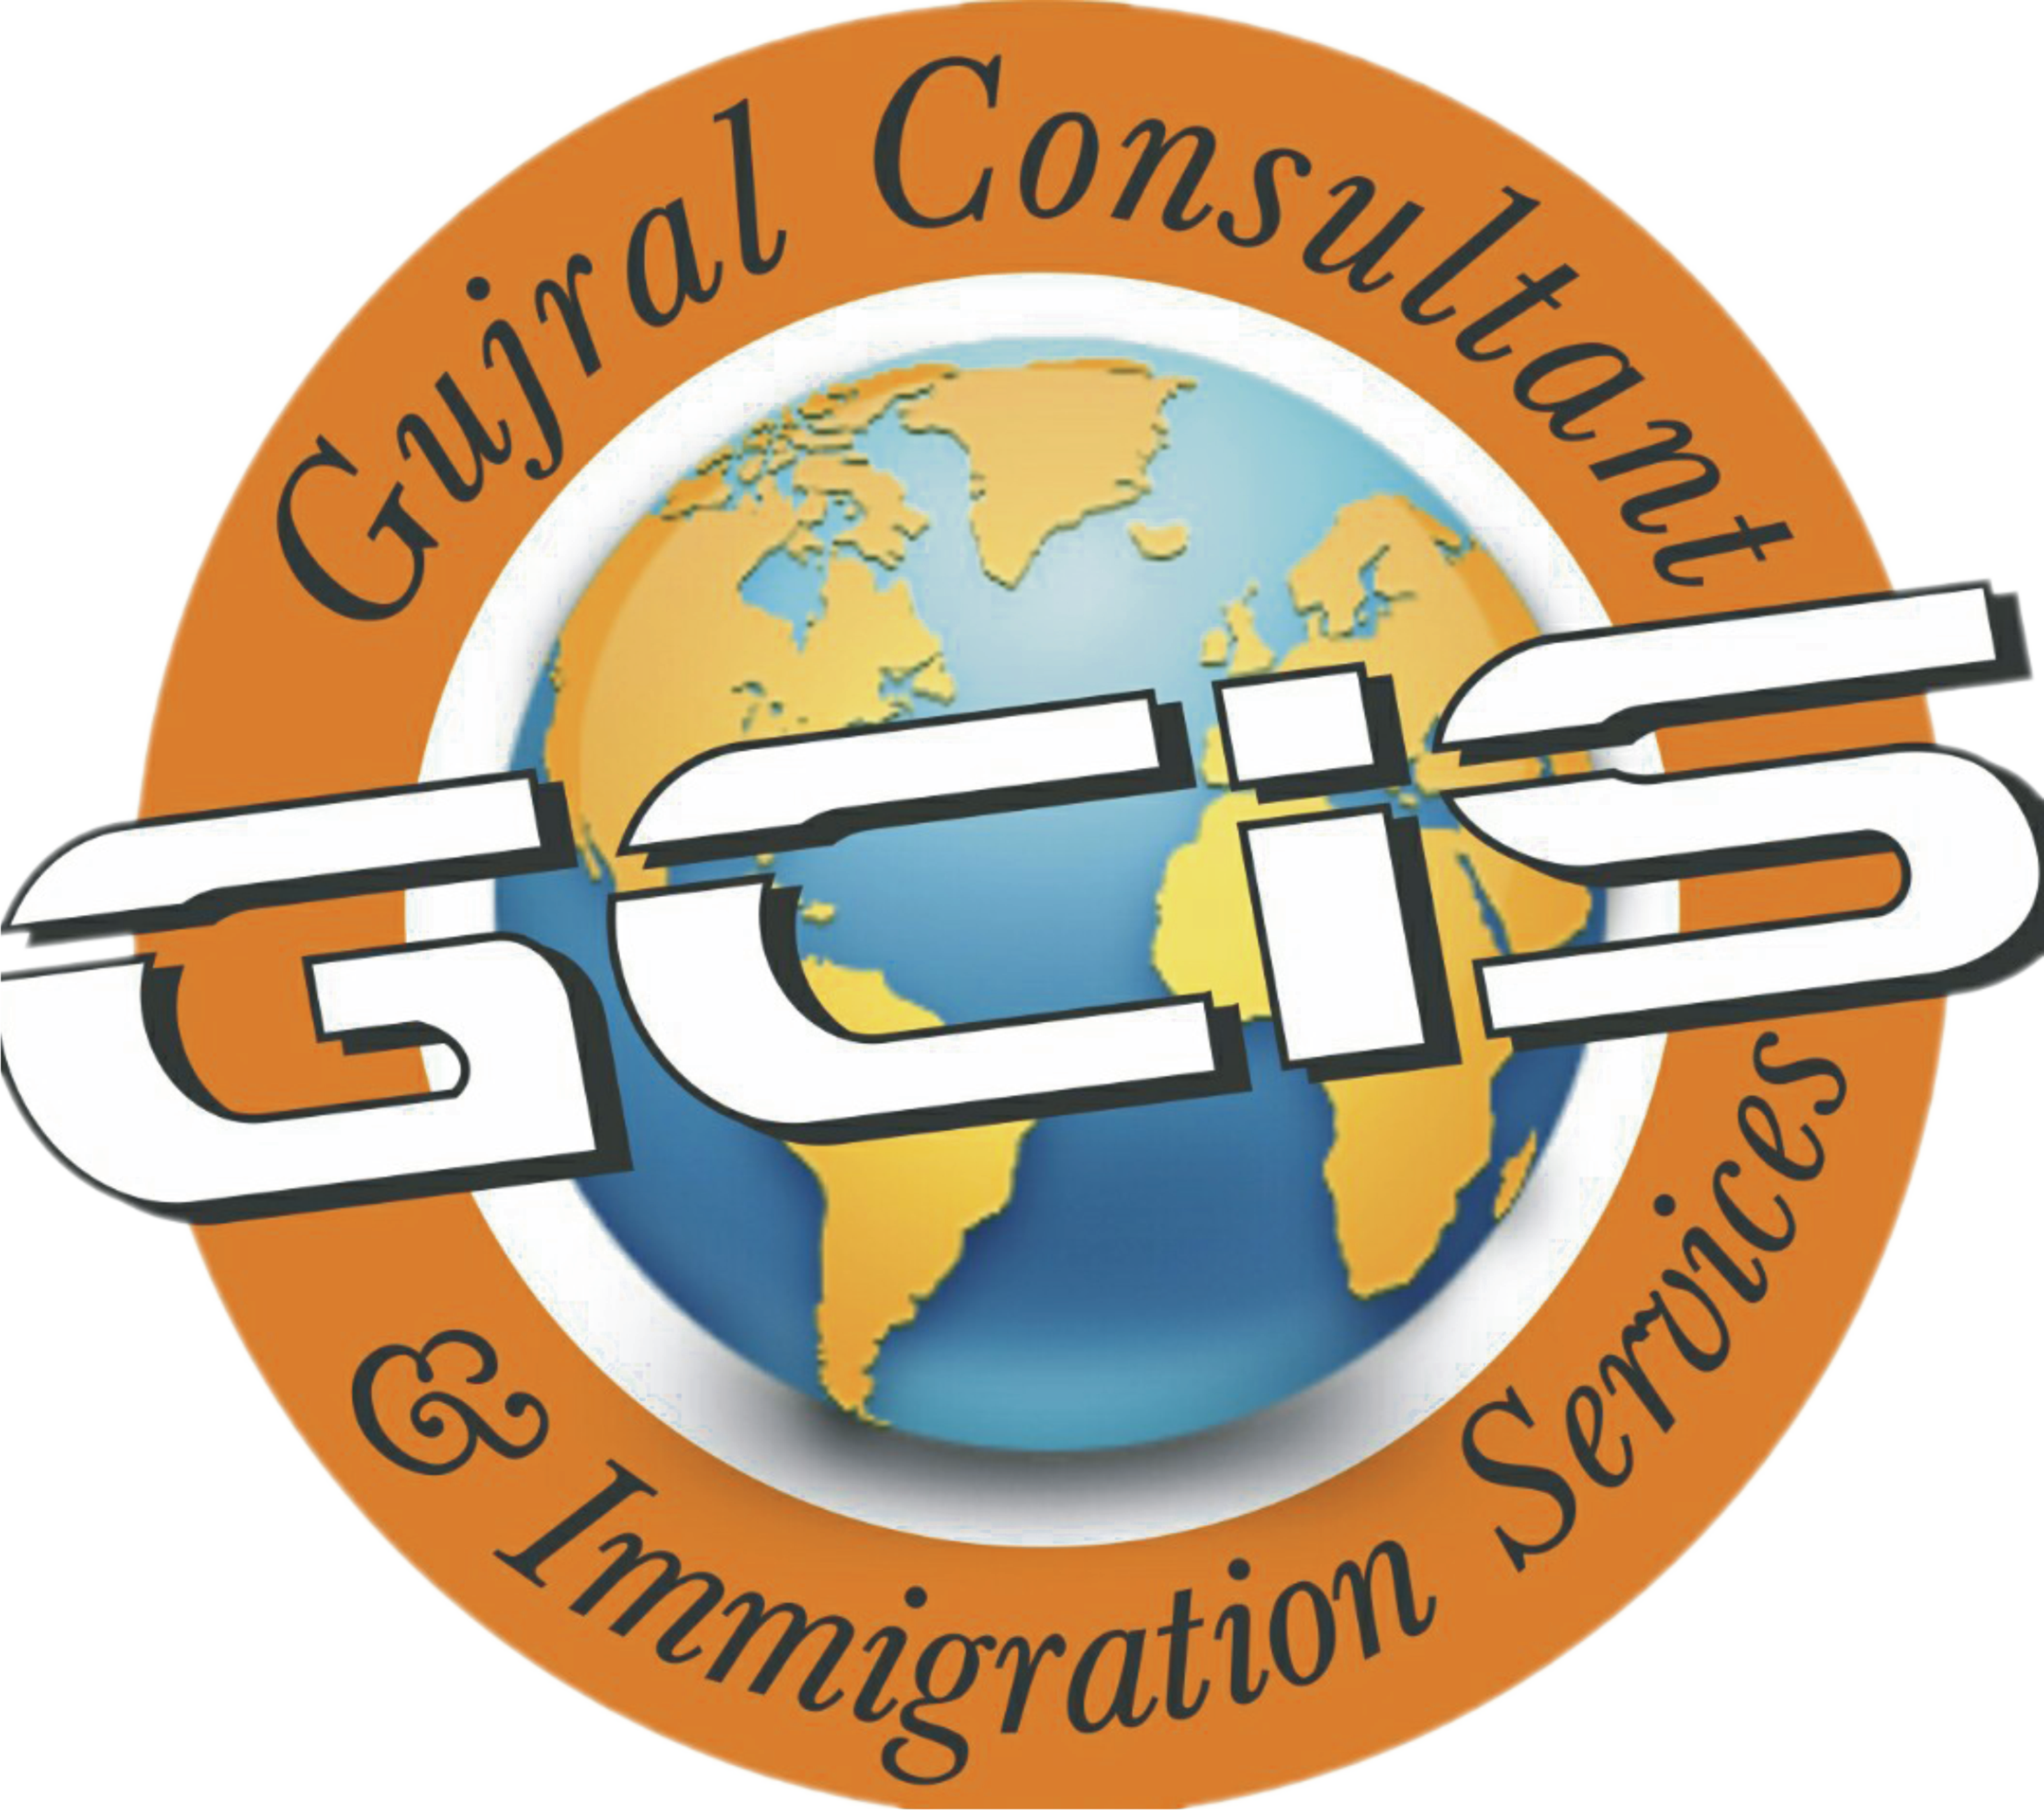 Gujral Consultant & Immigration Services|IT Services|Professional Services